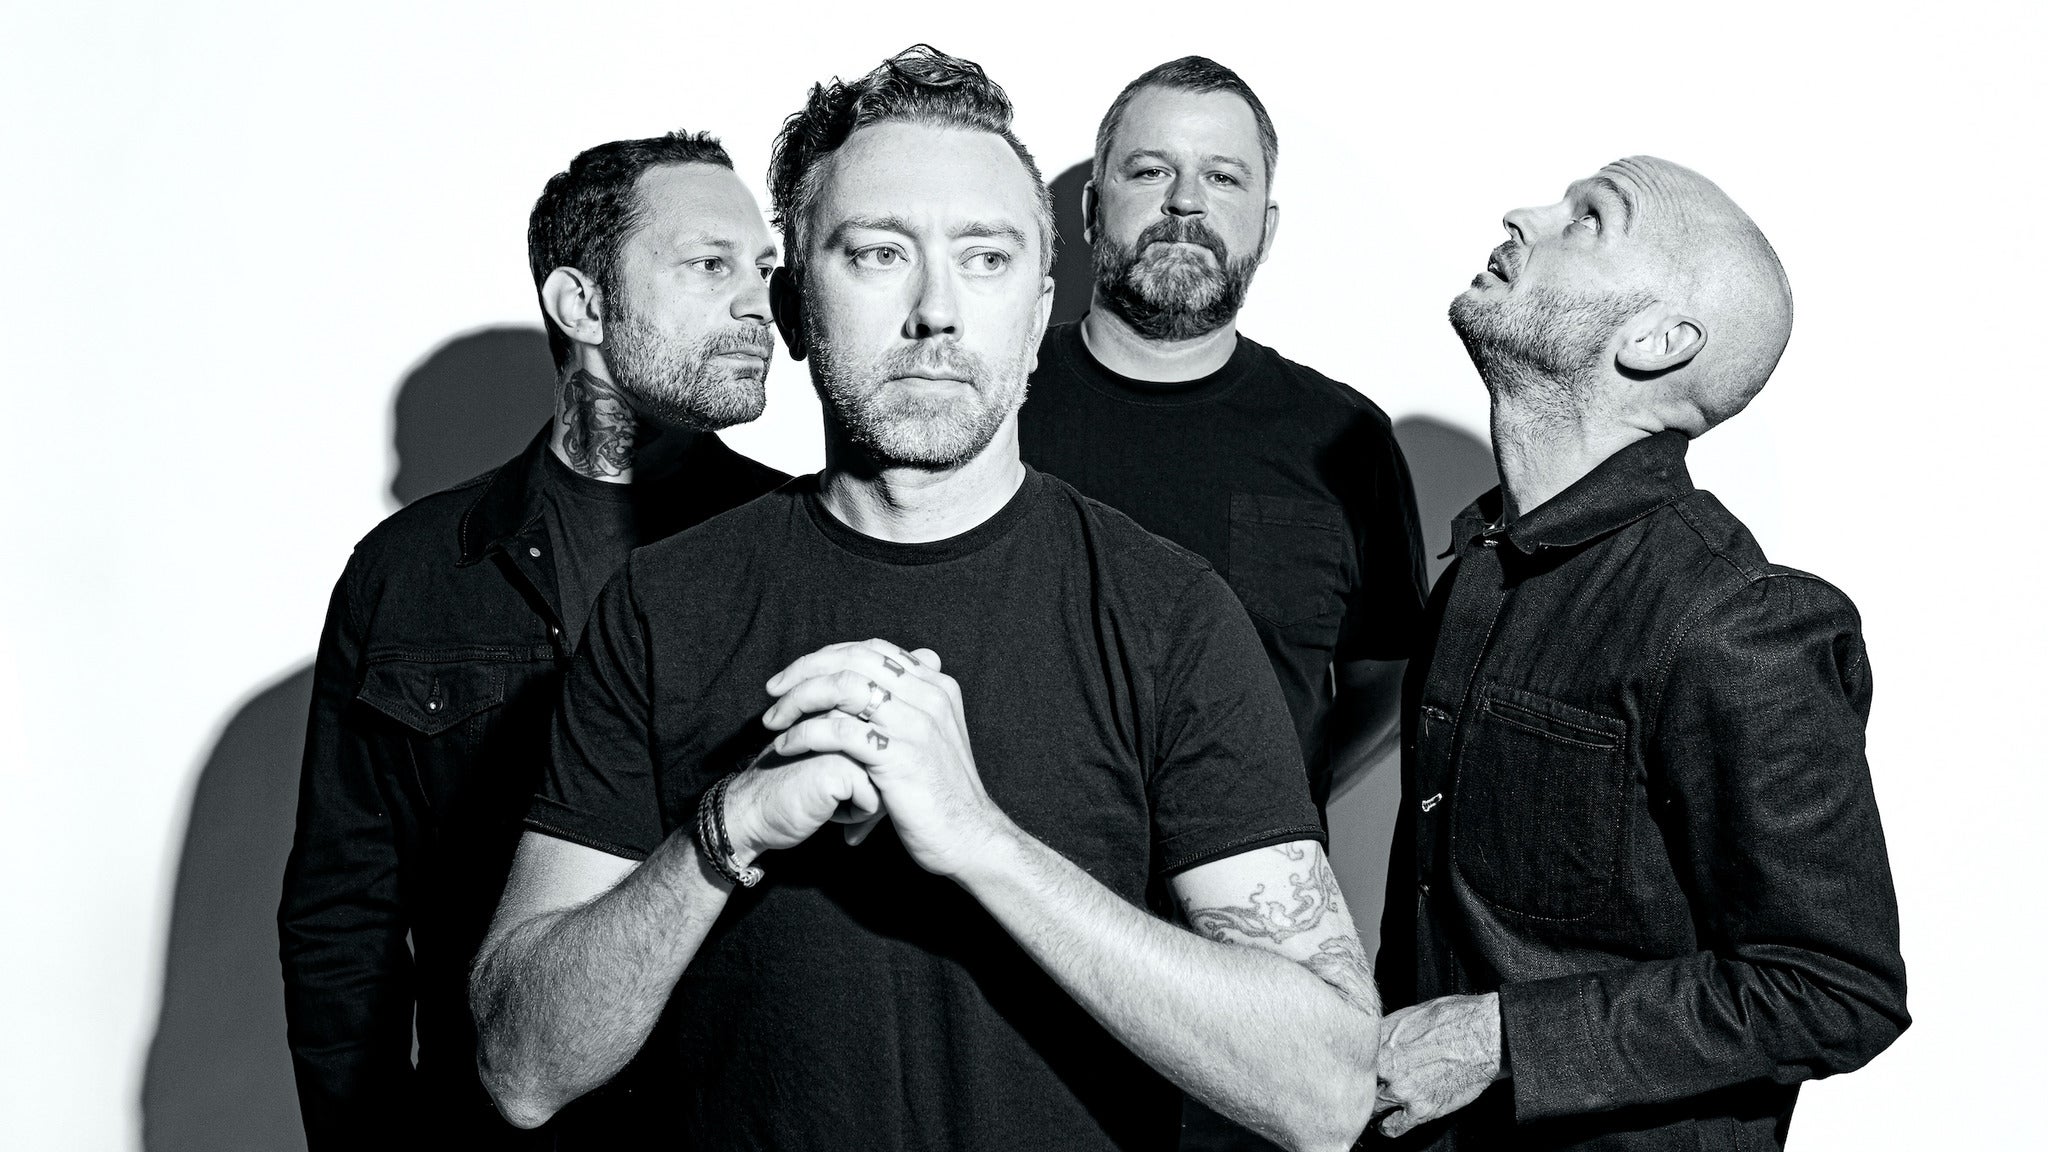 Rise Against With The Used presale password for early tickets in Hampton Beach